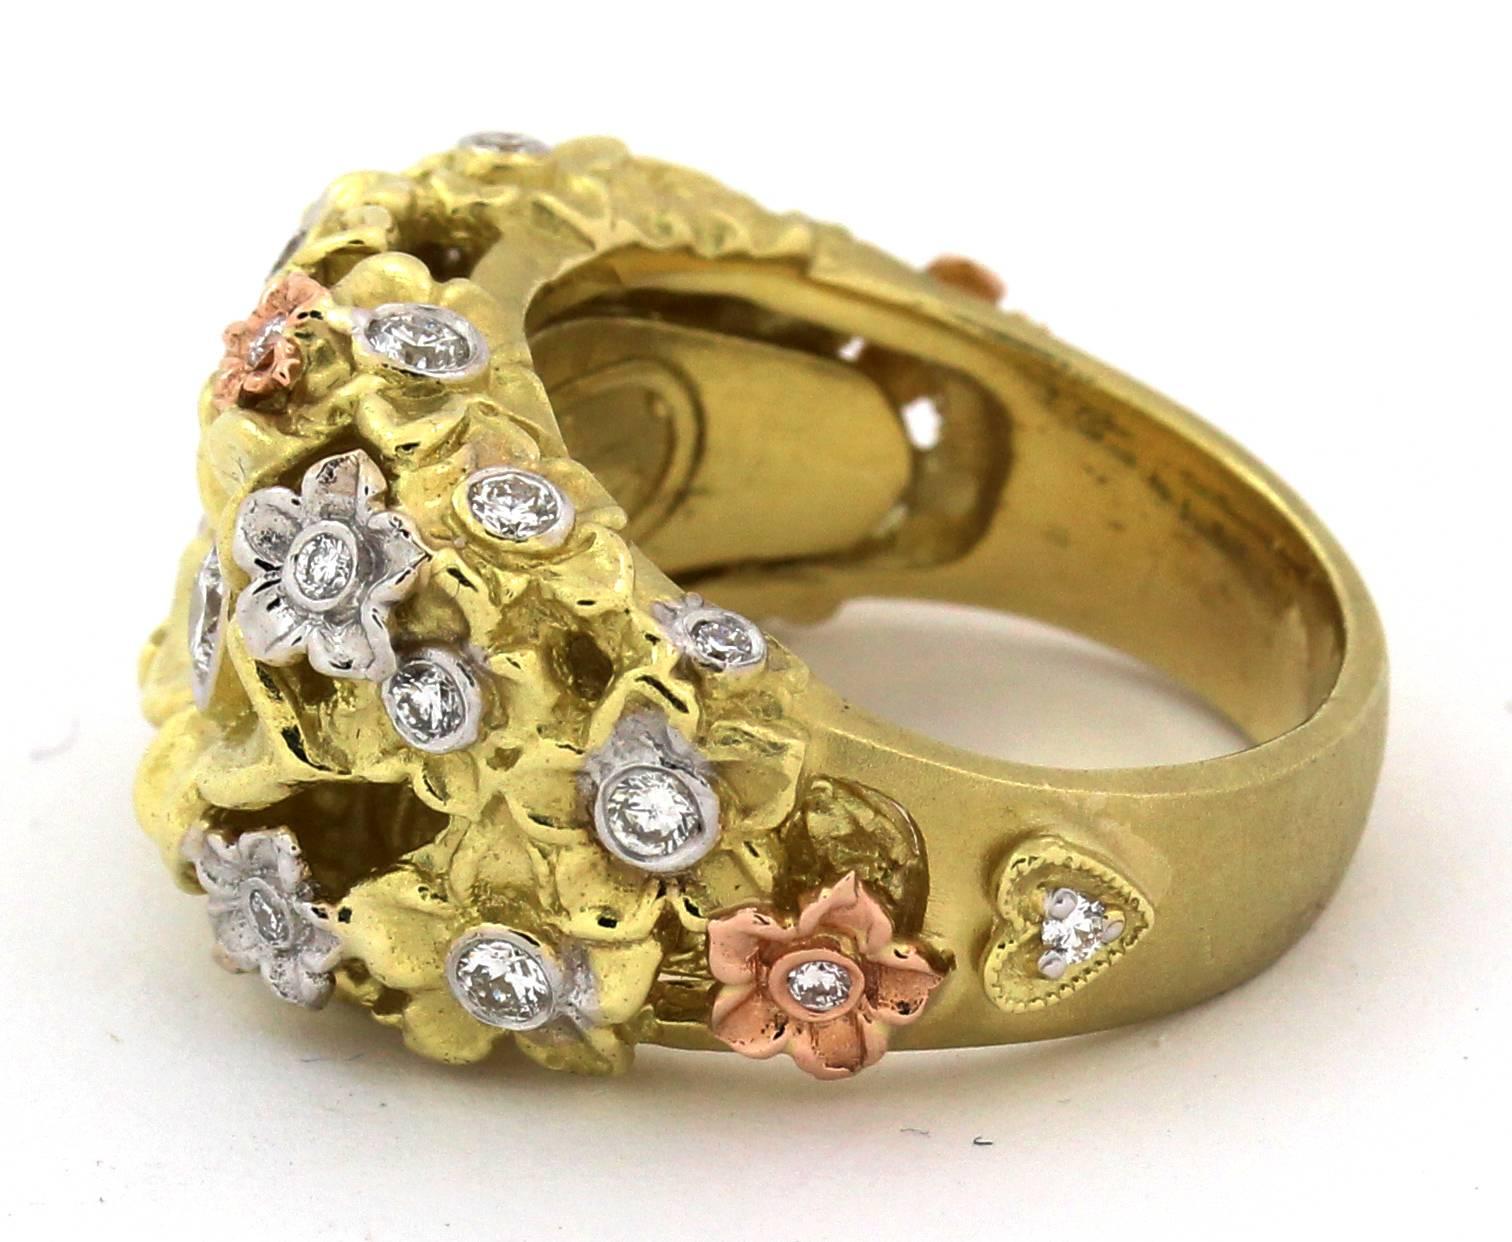 18K Tri-Color Gold Flower Ring with Diamonds by Stambolian

0.60ct. apprx. G Color, VS Clarity Diamonds 

Currently size 6.5. Sizable

Ring face is 0.5 inch wide. Band is 0.3 inch wide

Has the Stambolian 